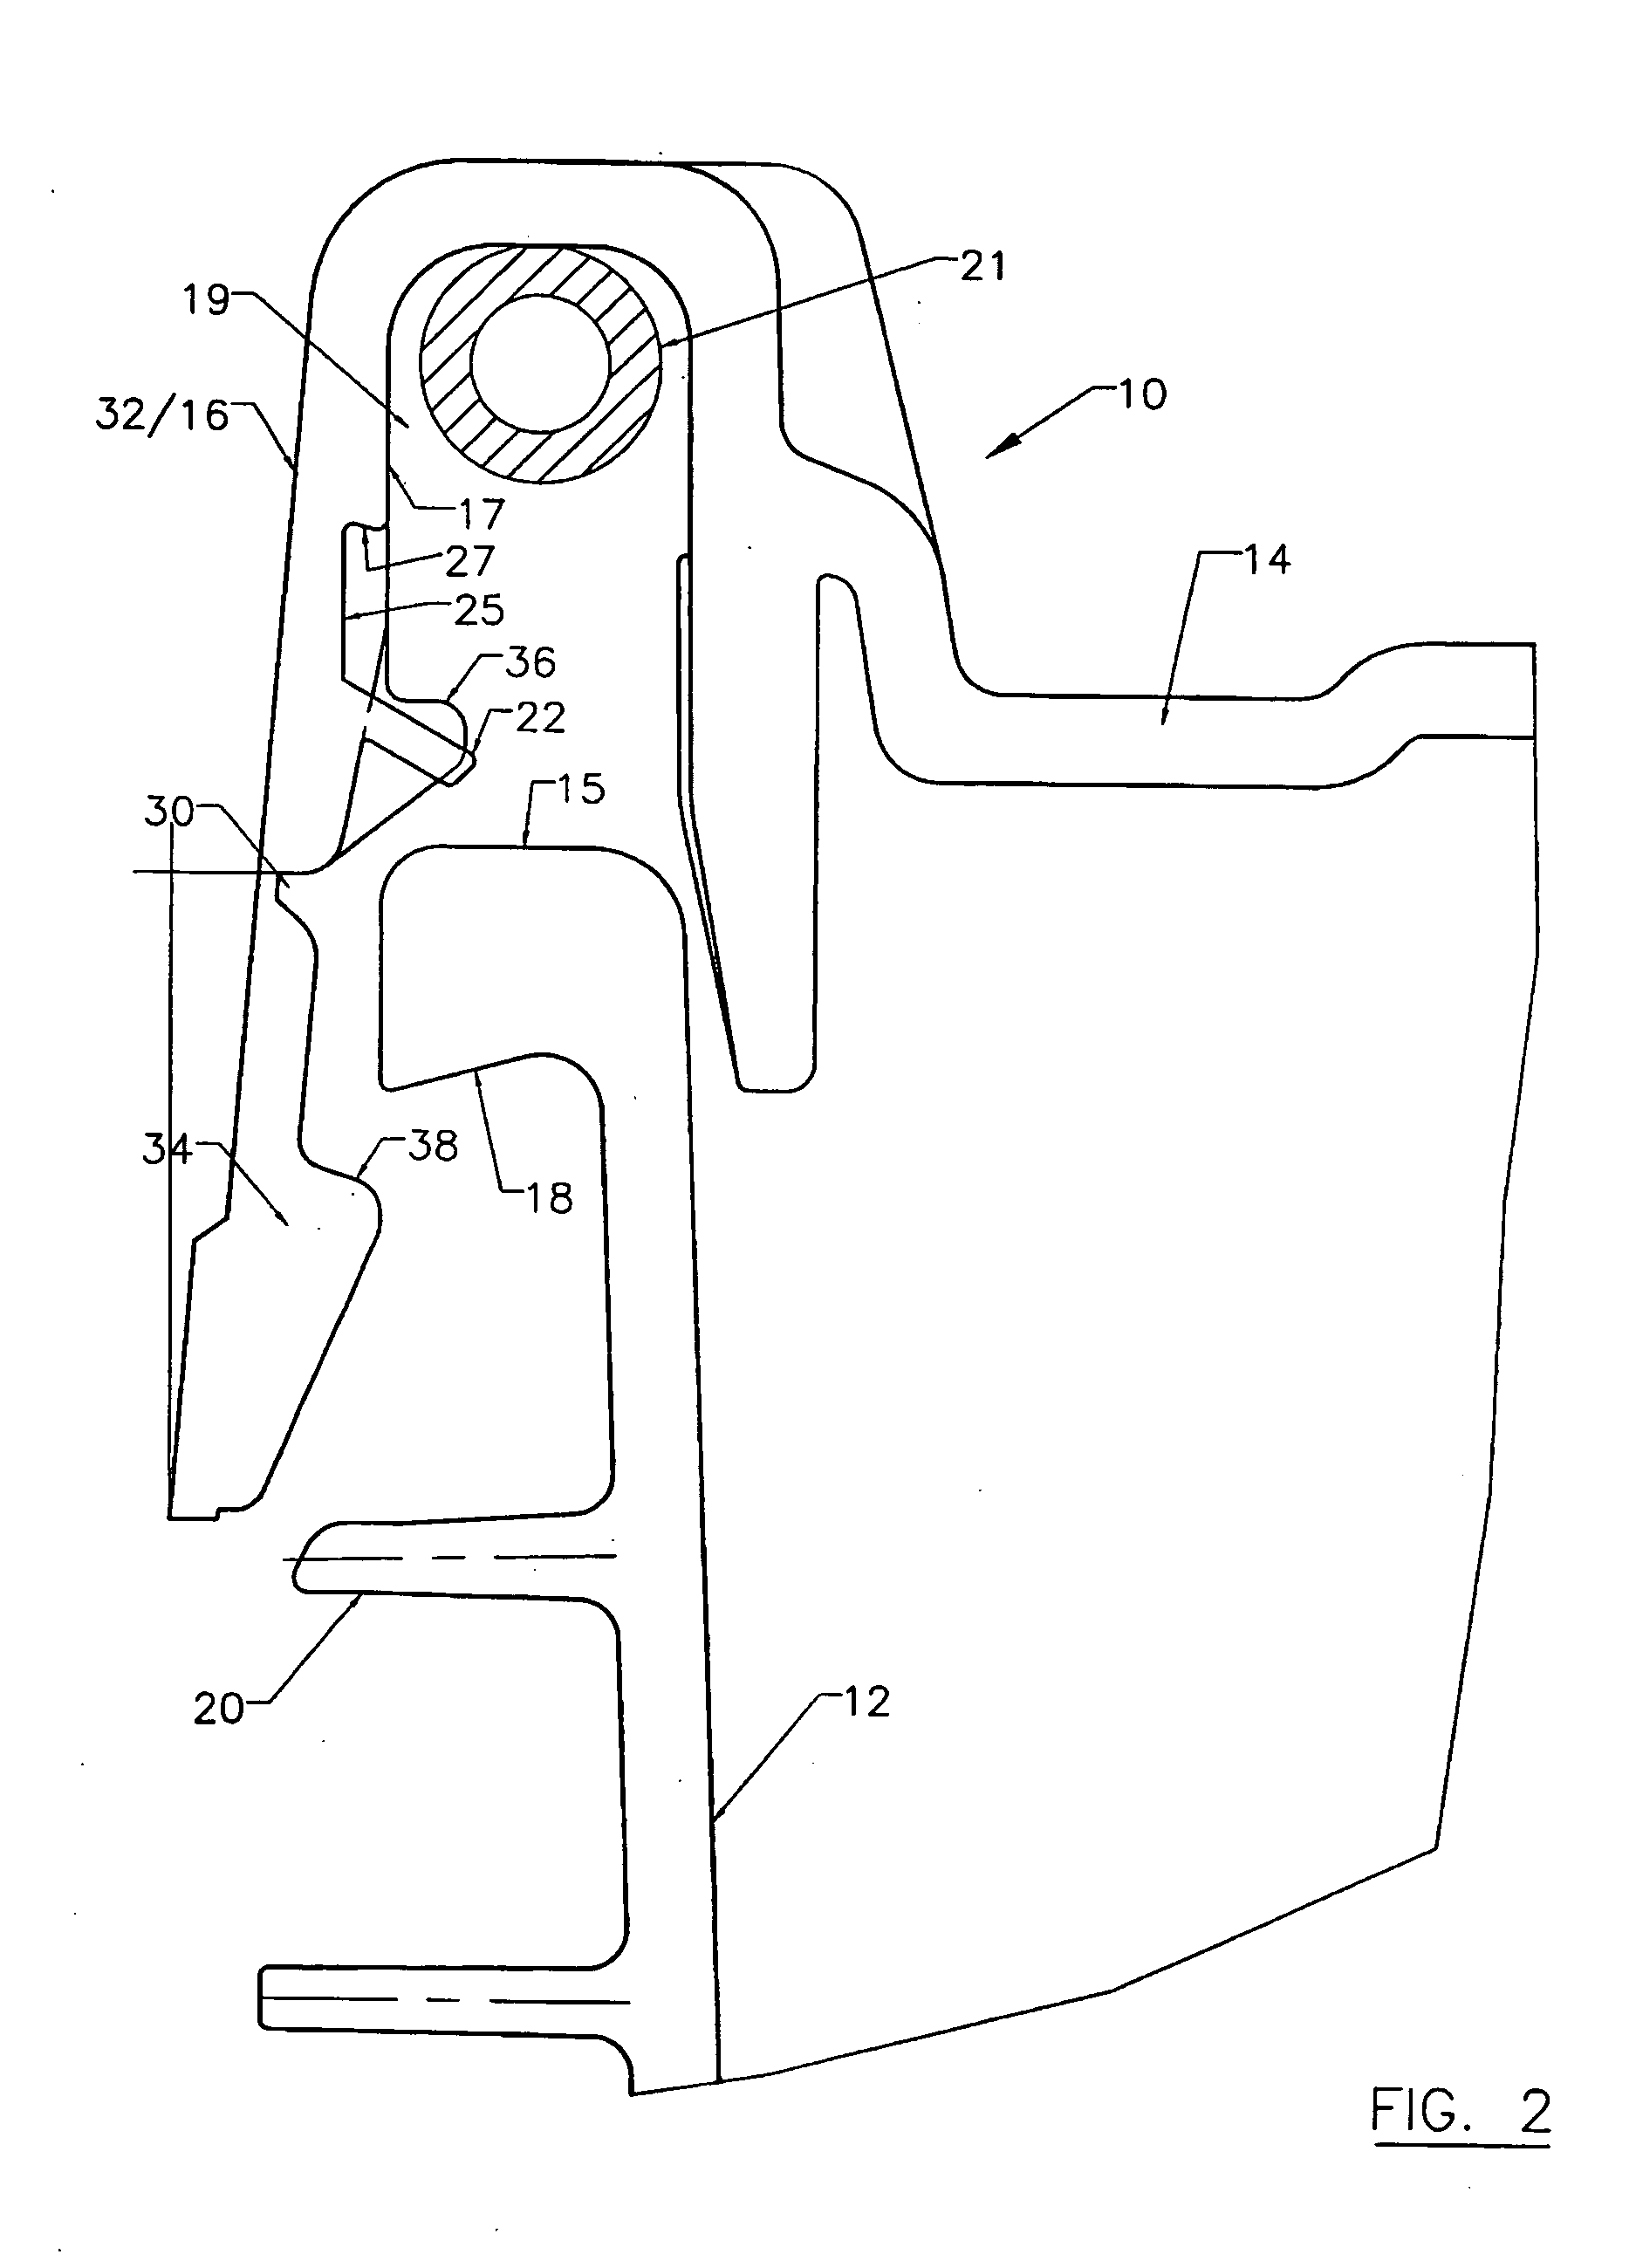 Apparatus for securing gasket prior to lid installation